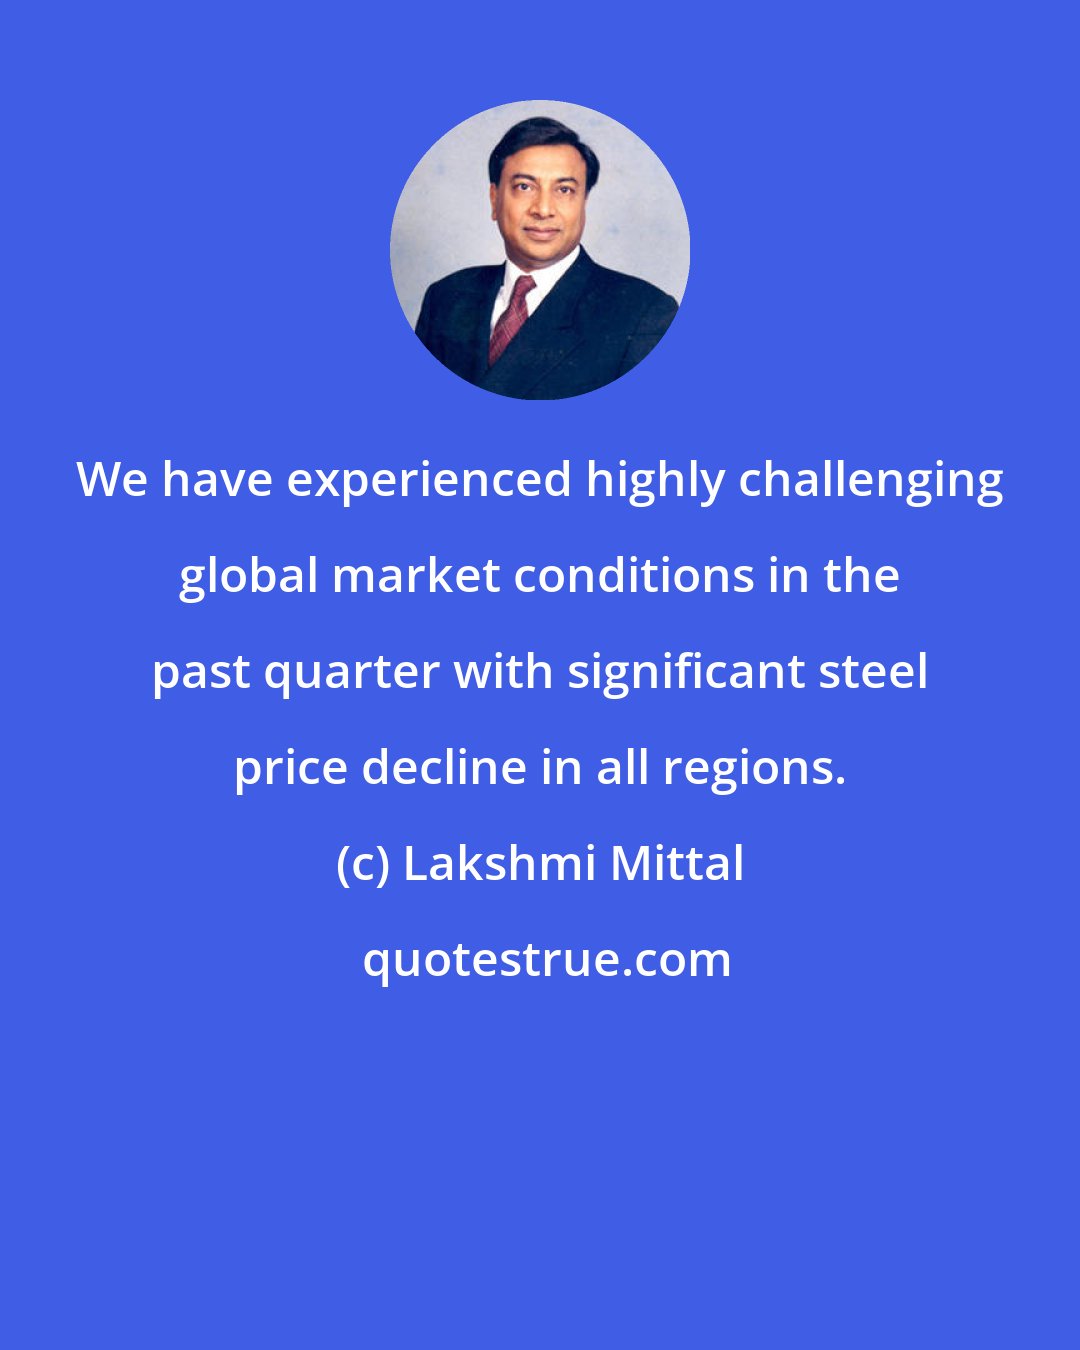 Lakshmi Mittal: We have experienced highly challenging global market conditions in the past quarter with significant steel price decline in all regions.